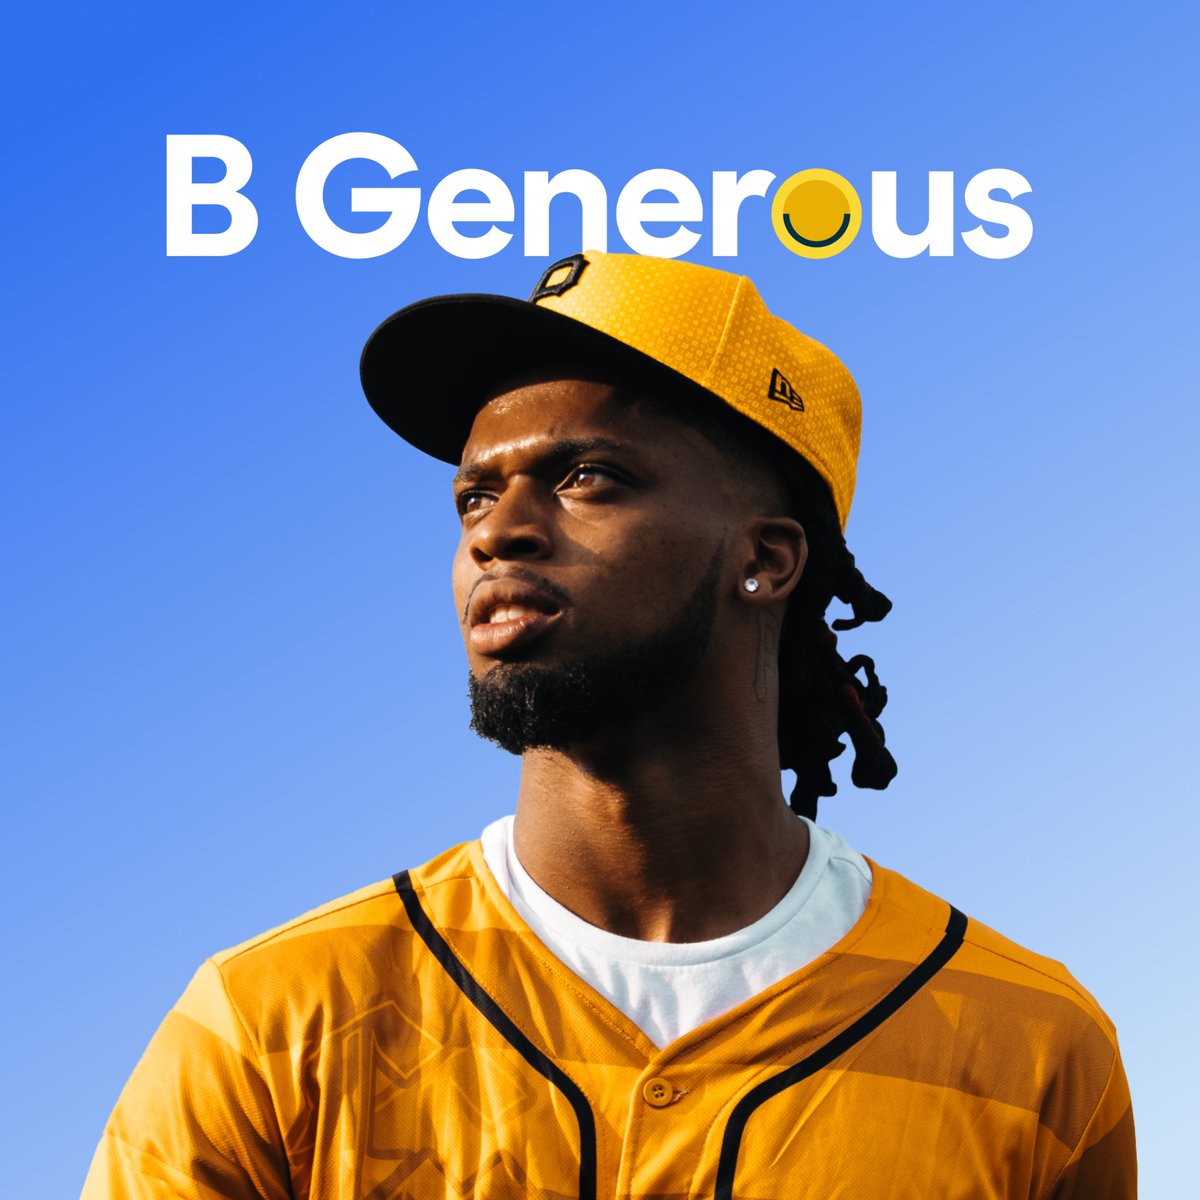 Welcome to the B Generous team @HamlinIsland, excited to collab with you to help Nonprofit get the funding, they need! Let’s do this 👊 #damar #damarhamlin